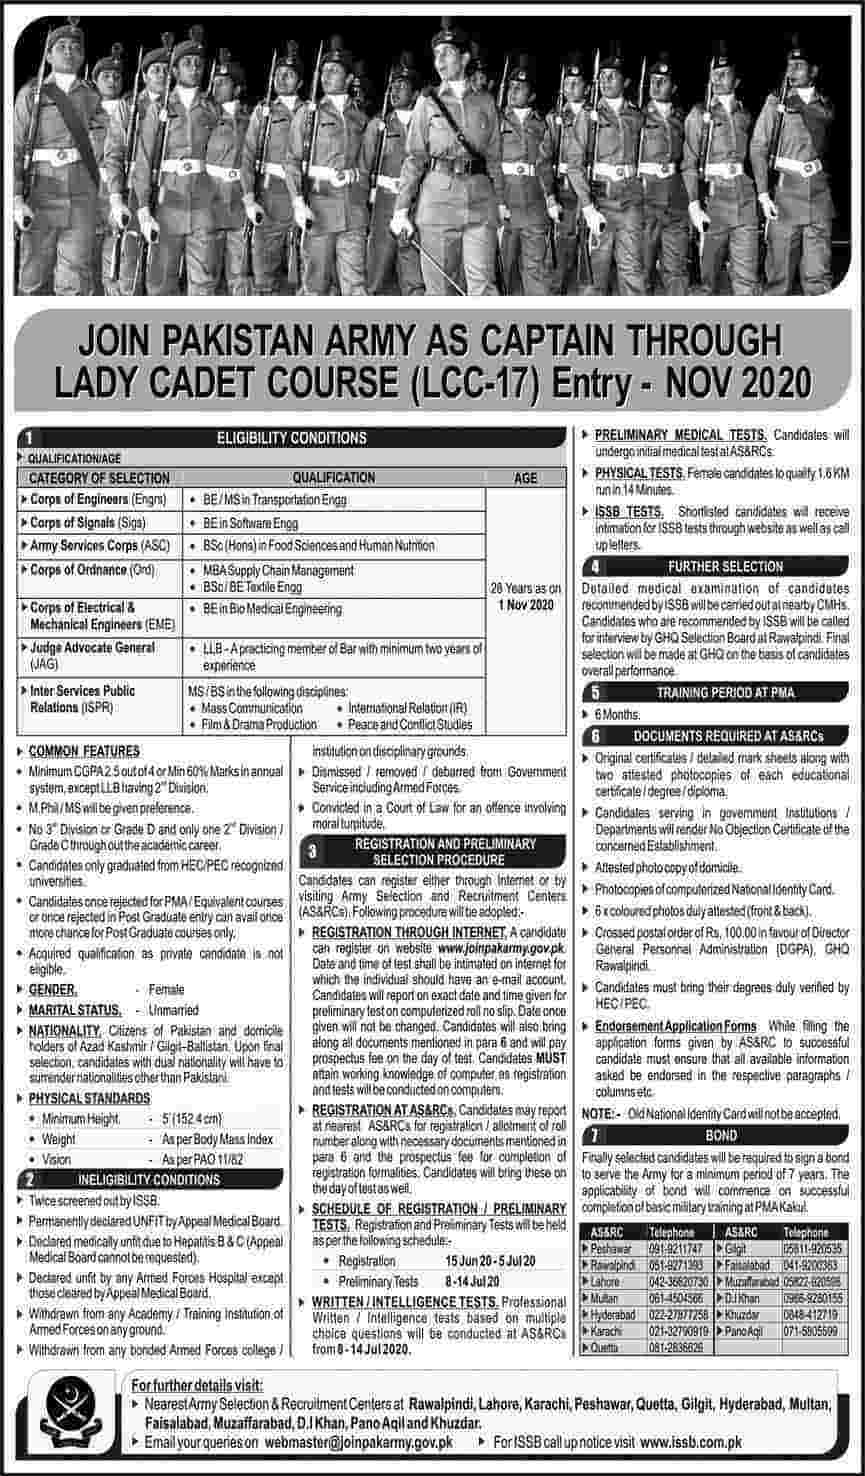 Join Pak Army as Captain Lady Cadet Course 2020 LCC-17